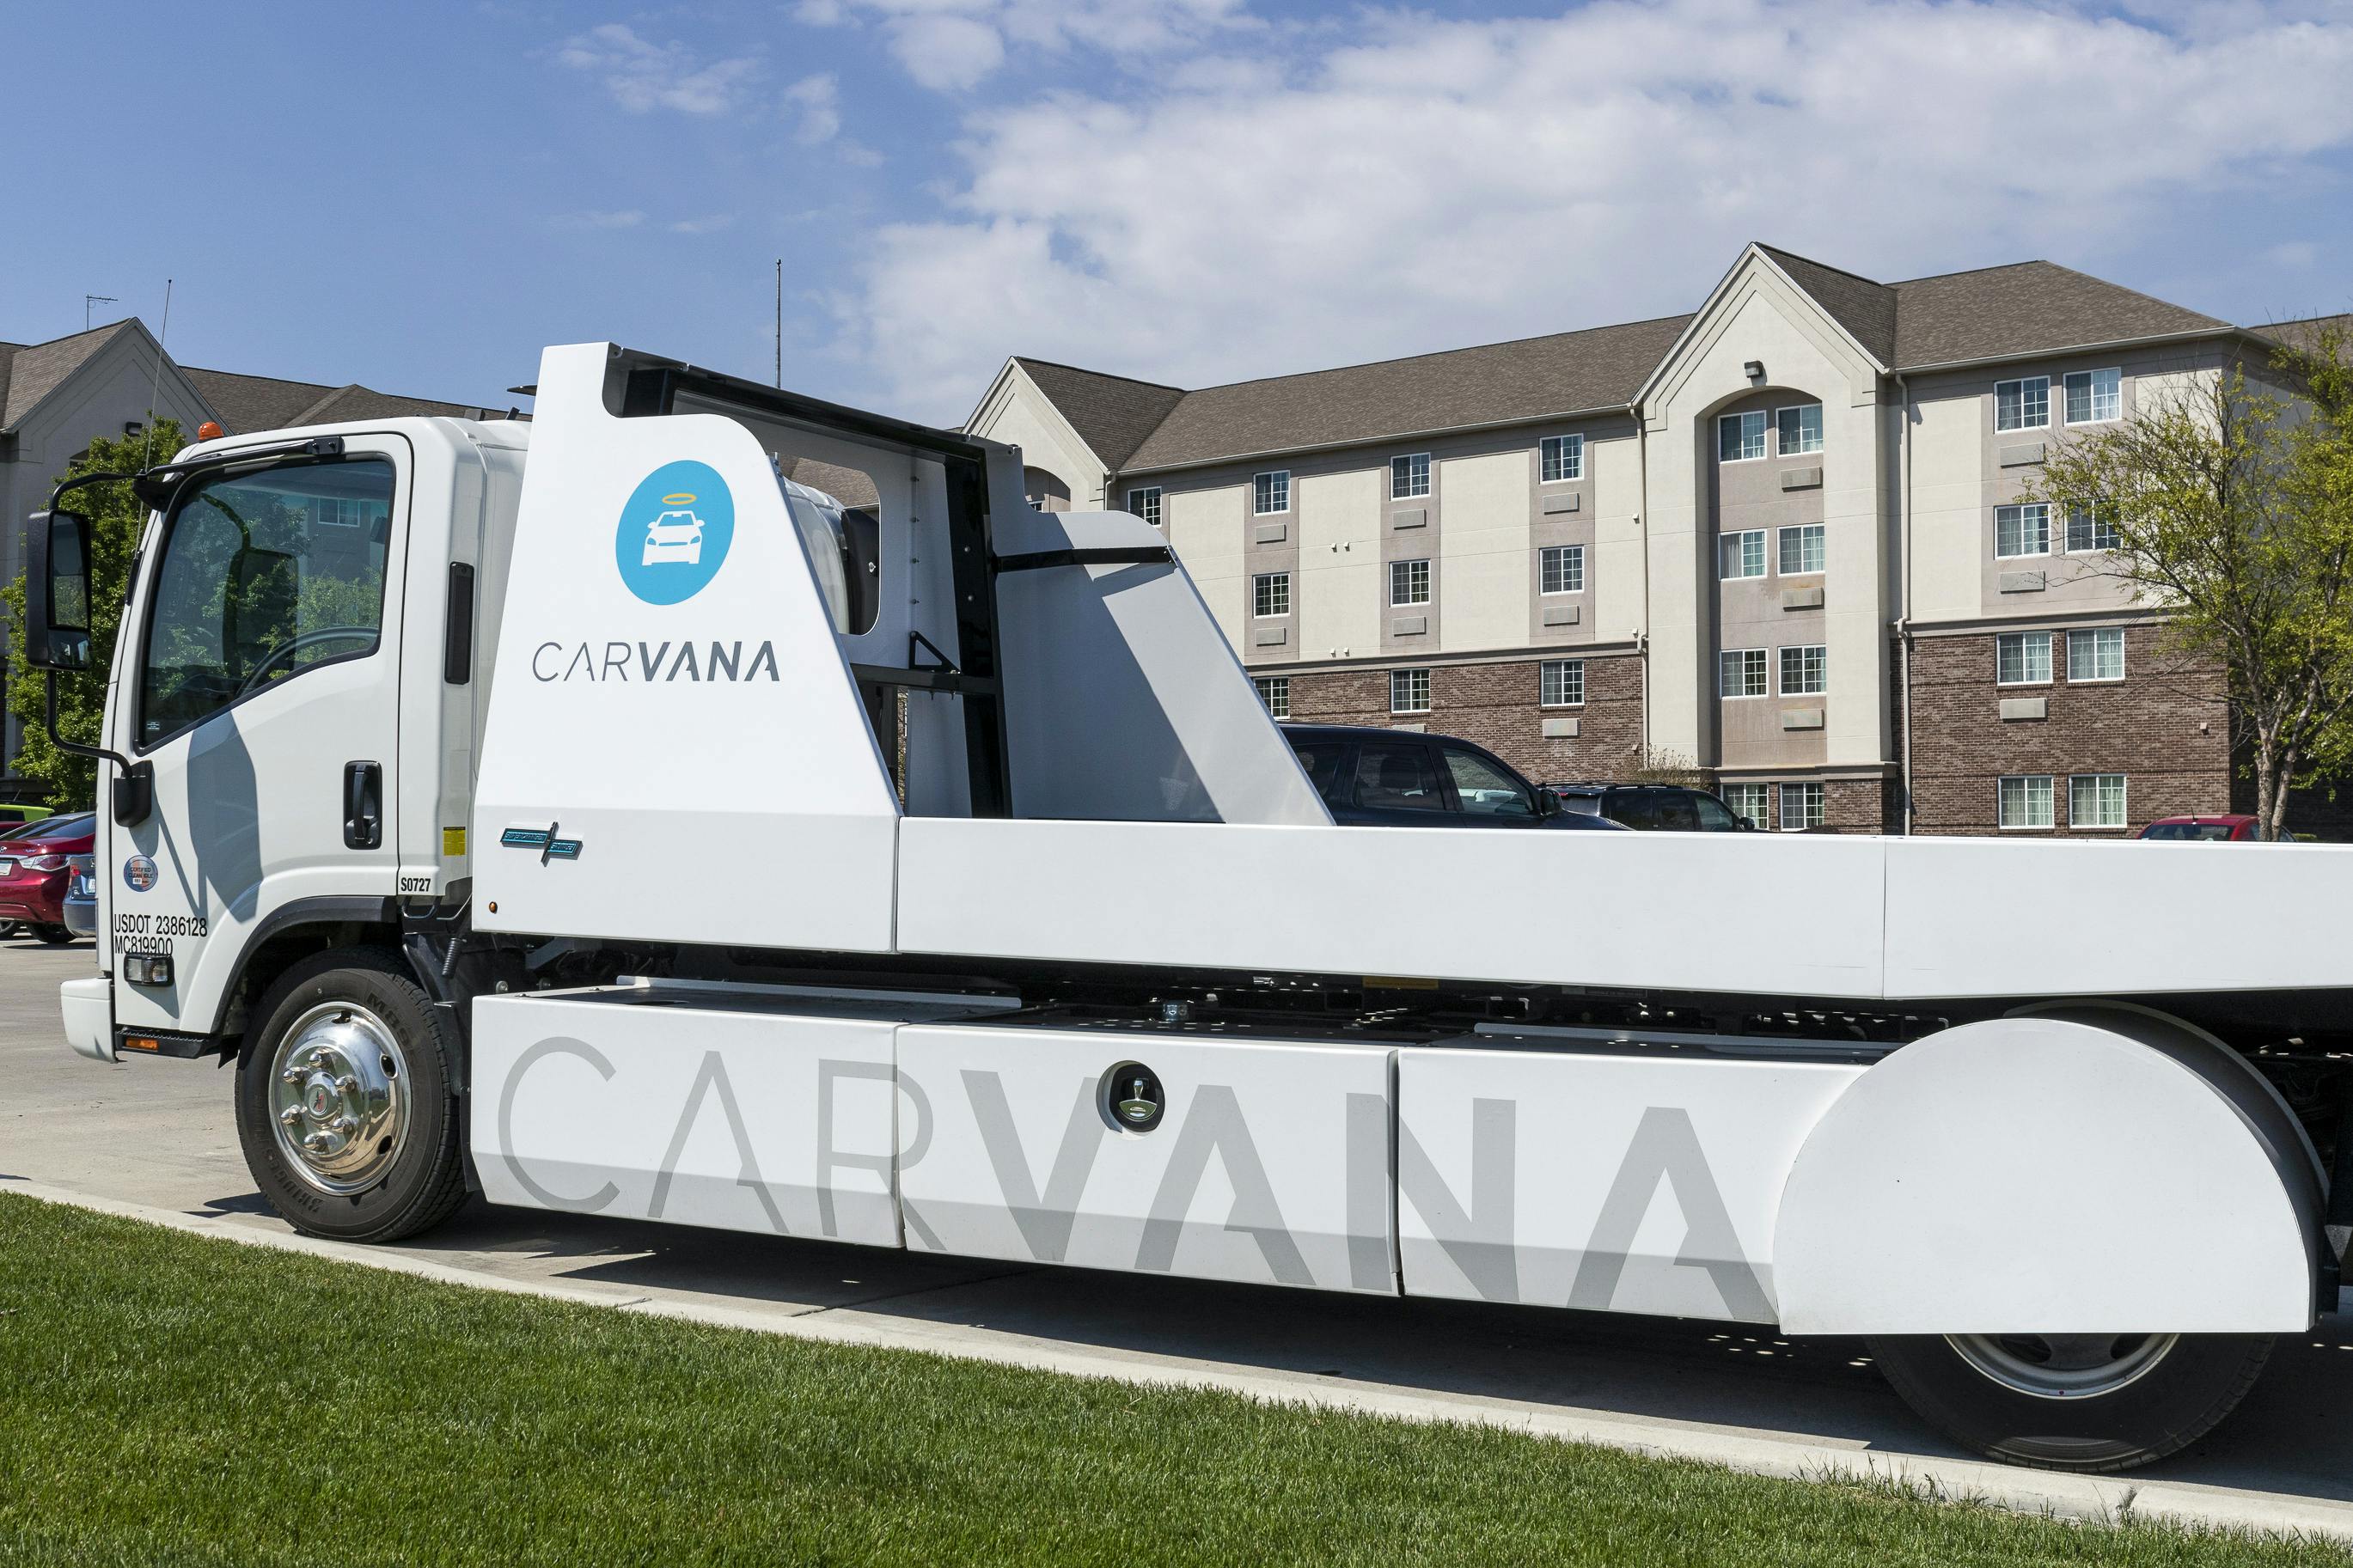 A Carvana truck parked outside of a house, ready to pick up a vehicle